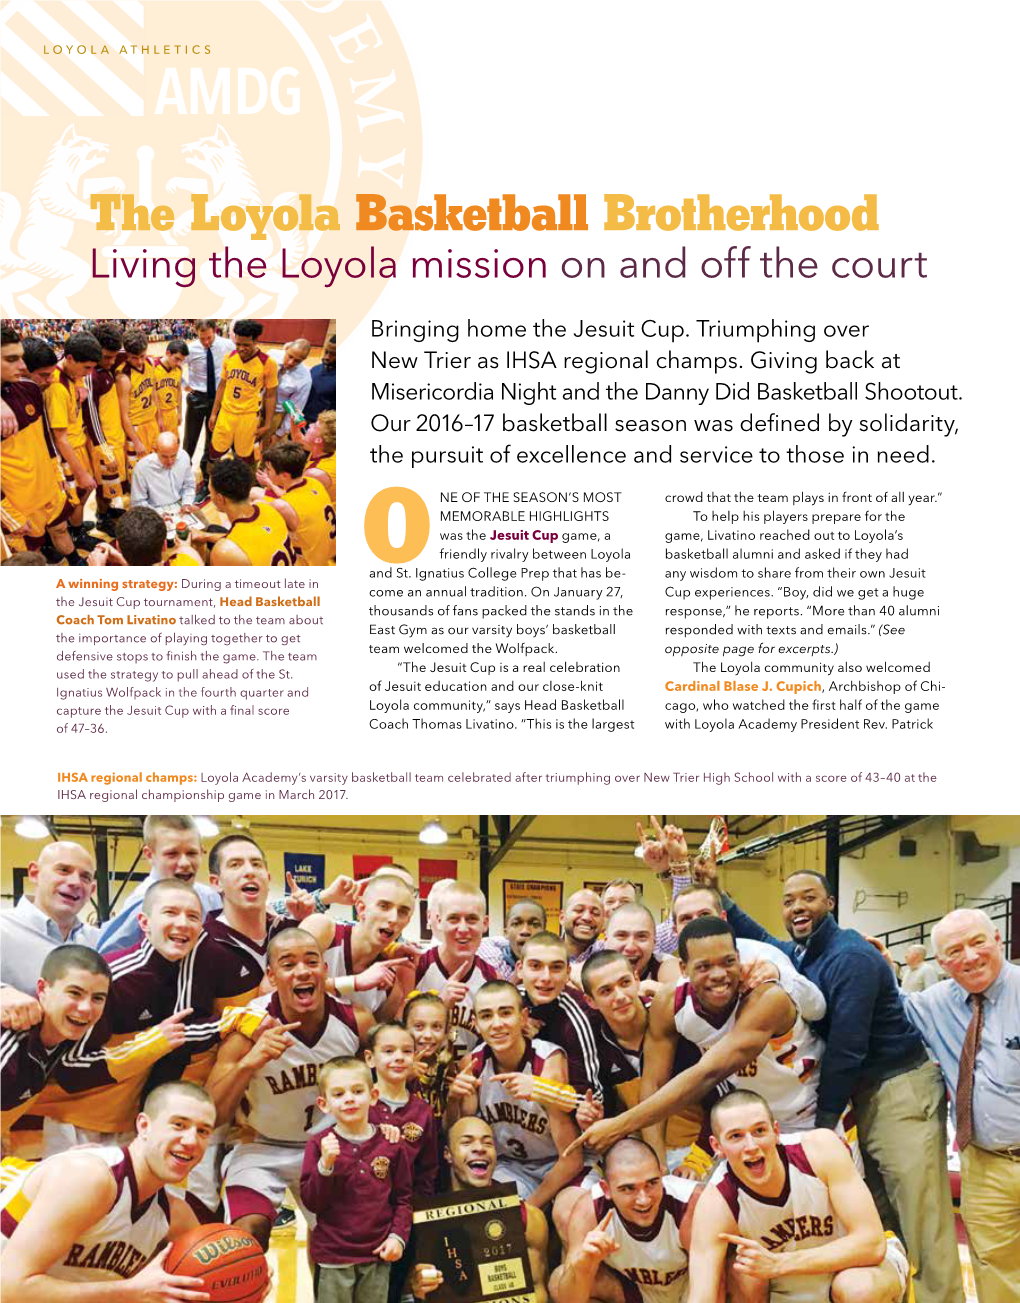 The Loyola Basketball Brotherhood Living the Loyola Mission on and Off the Court